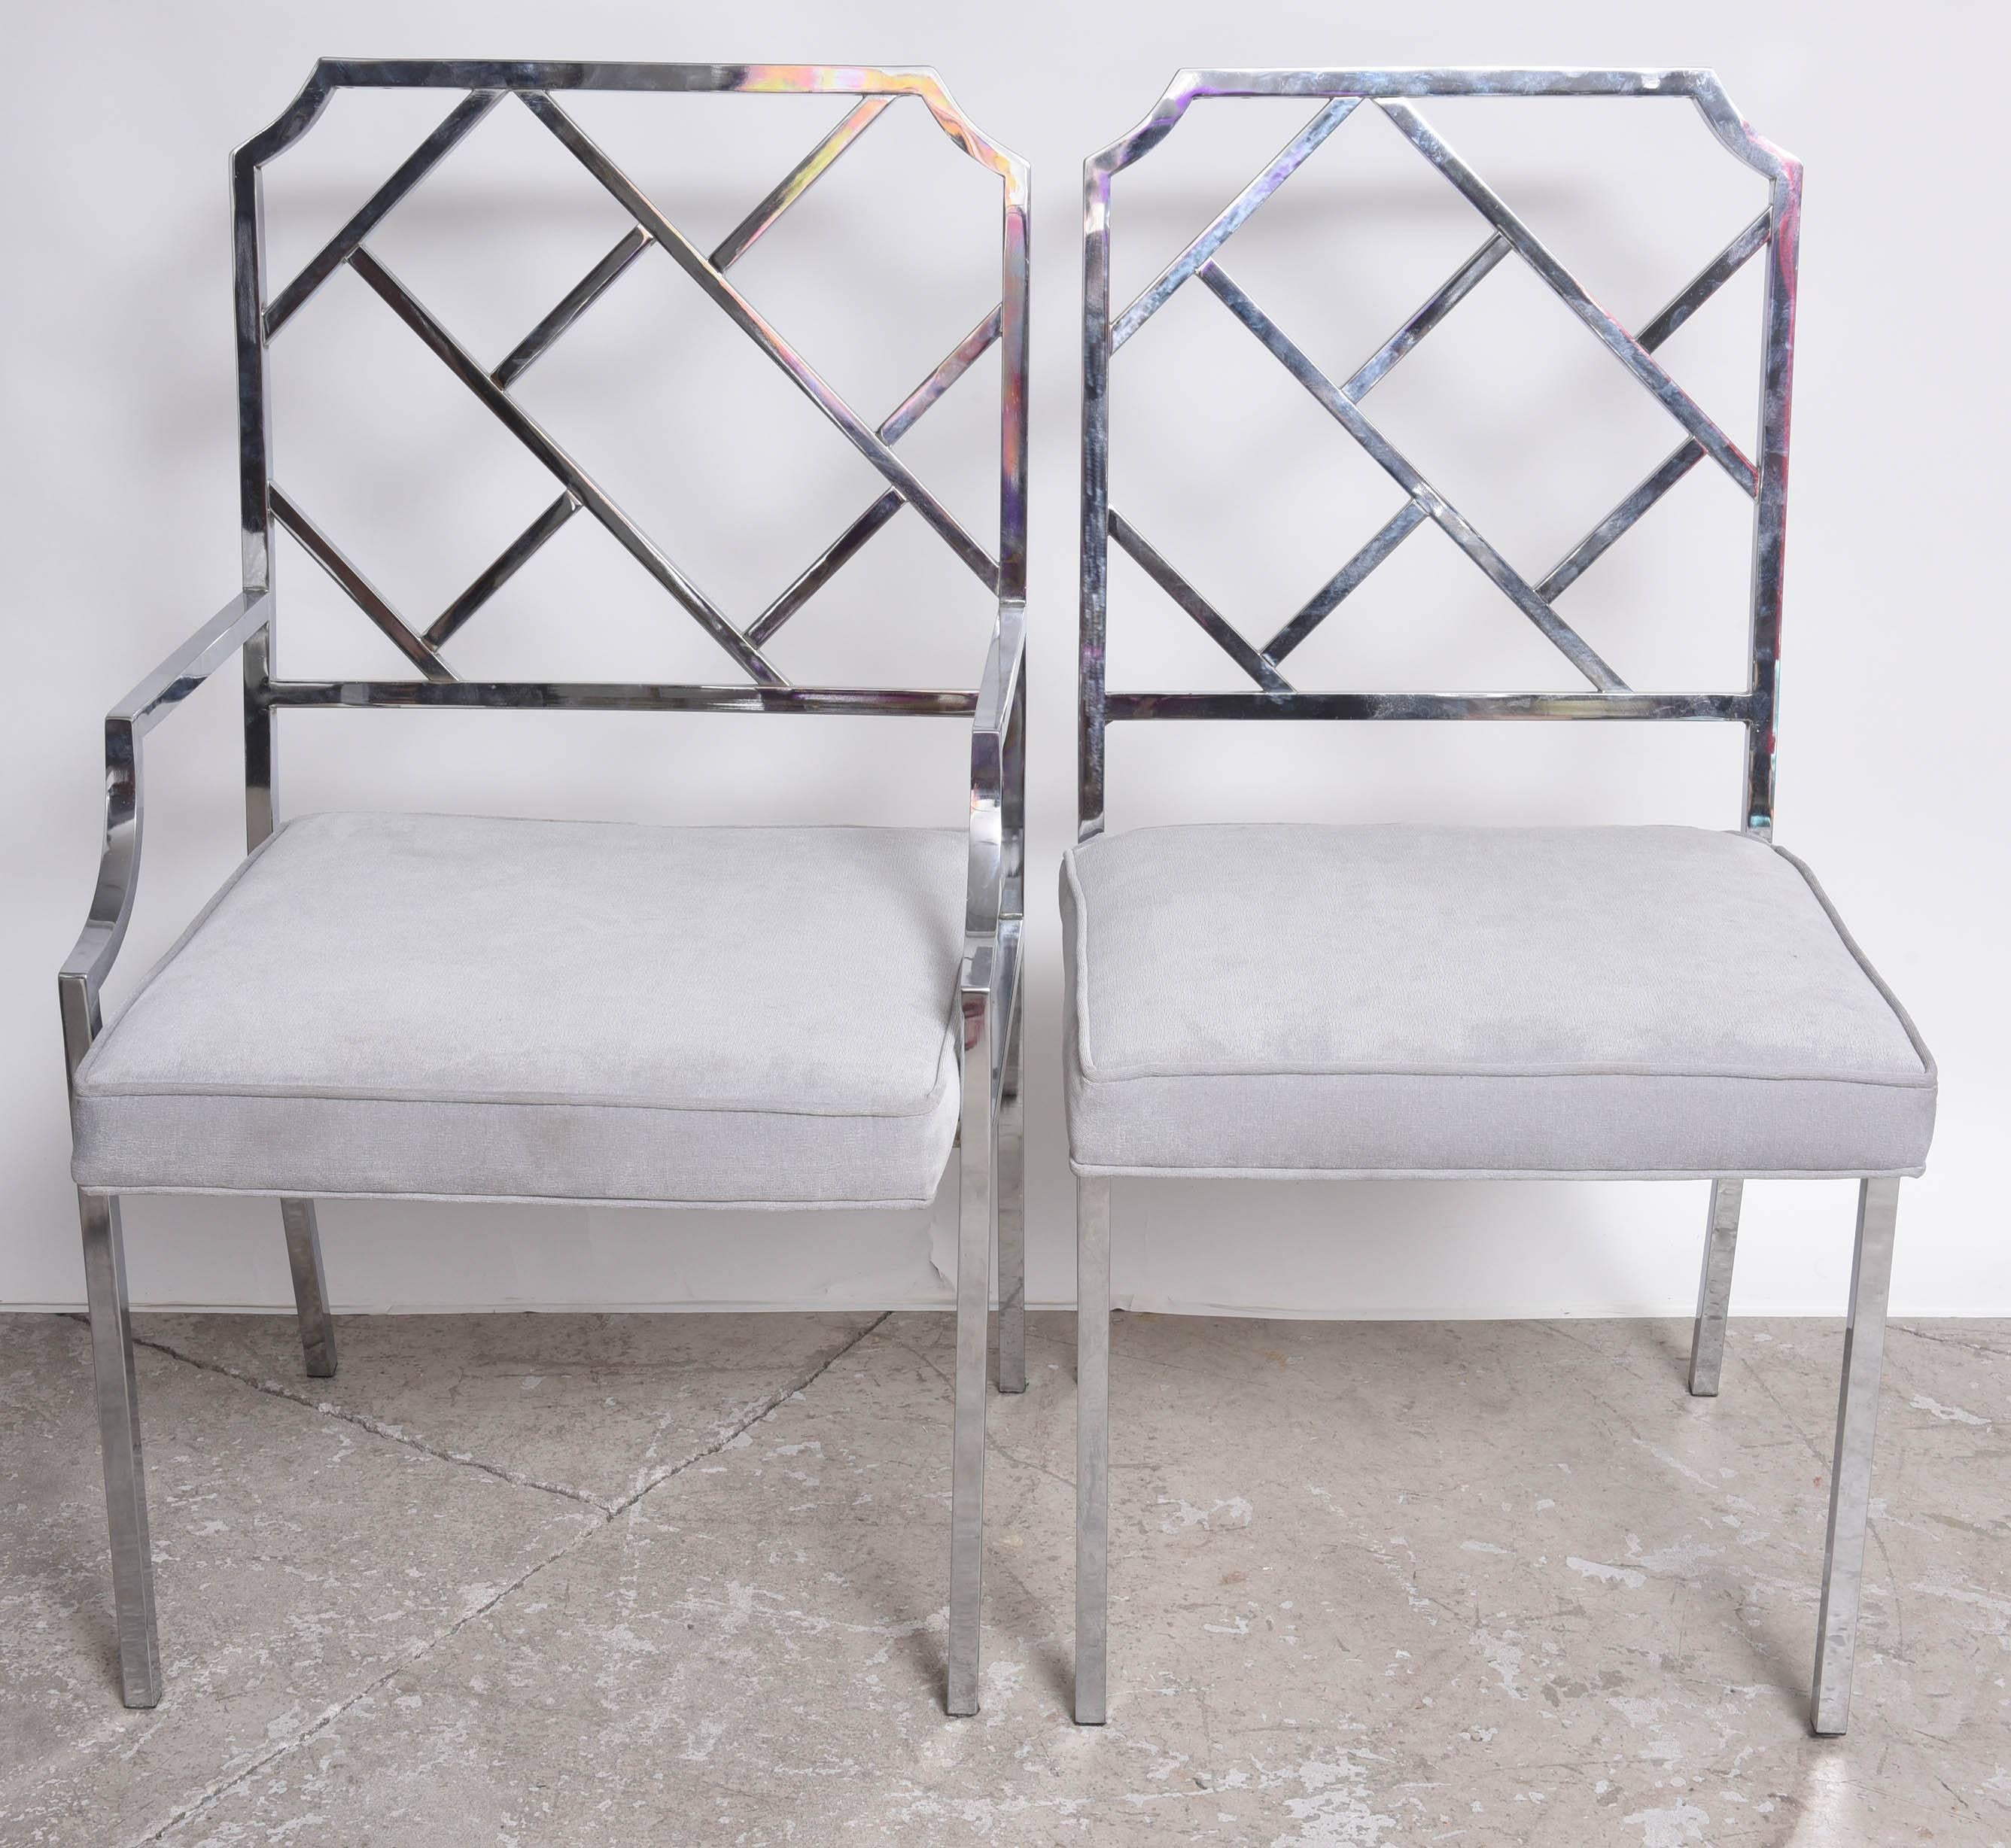 Set of four DIA (Design Institute of America) two with armrest and two without. Chairs designed by Milo Baughman, these have been reupholstered in a grey fabric; please look at photos for detail of chrome and upholstery. Size for no arms is W